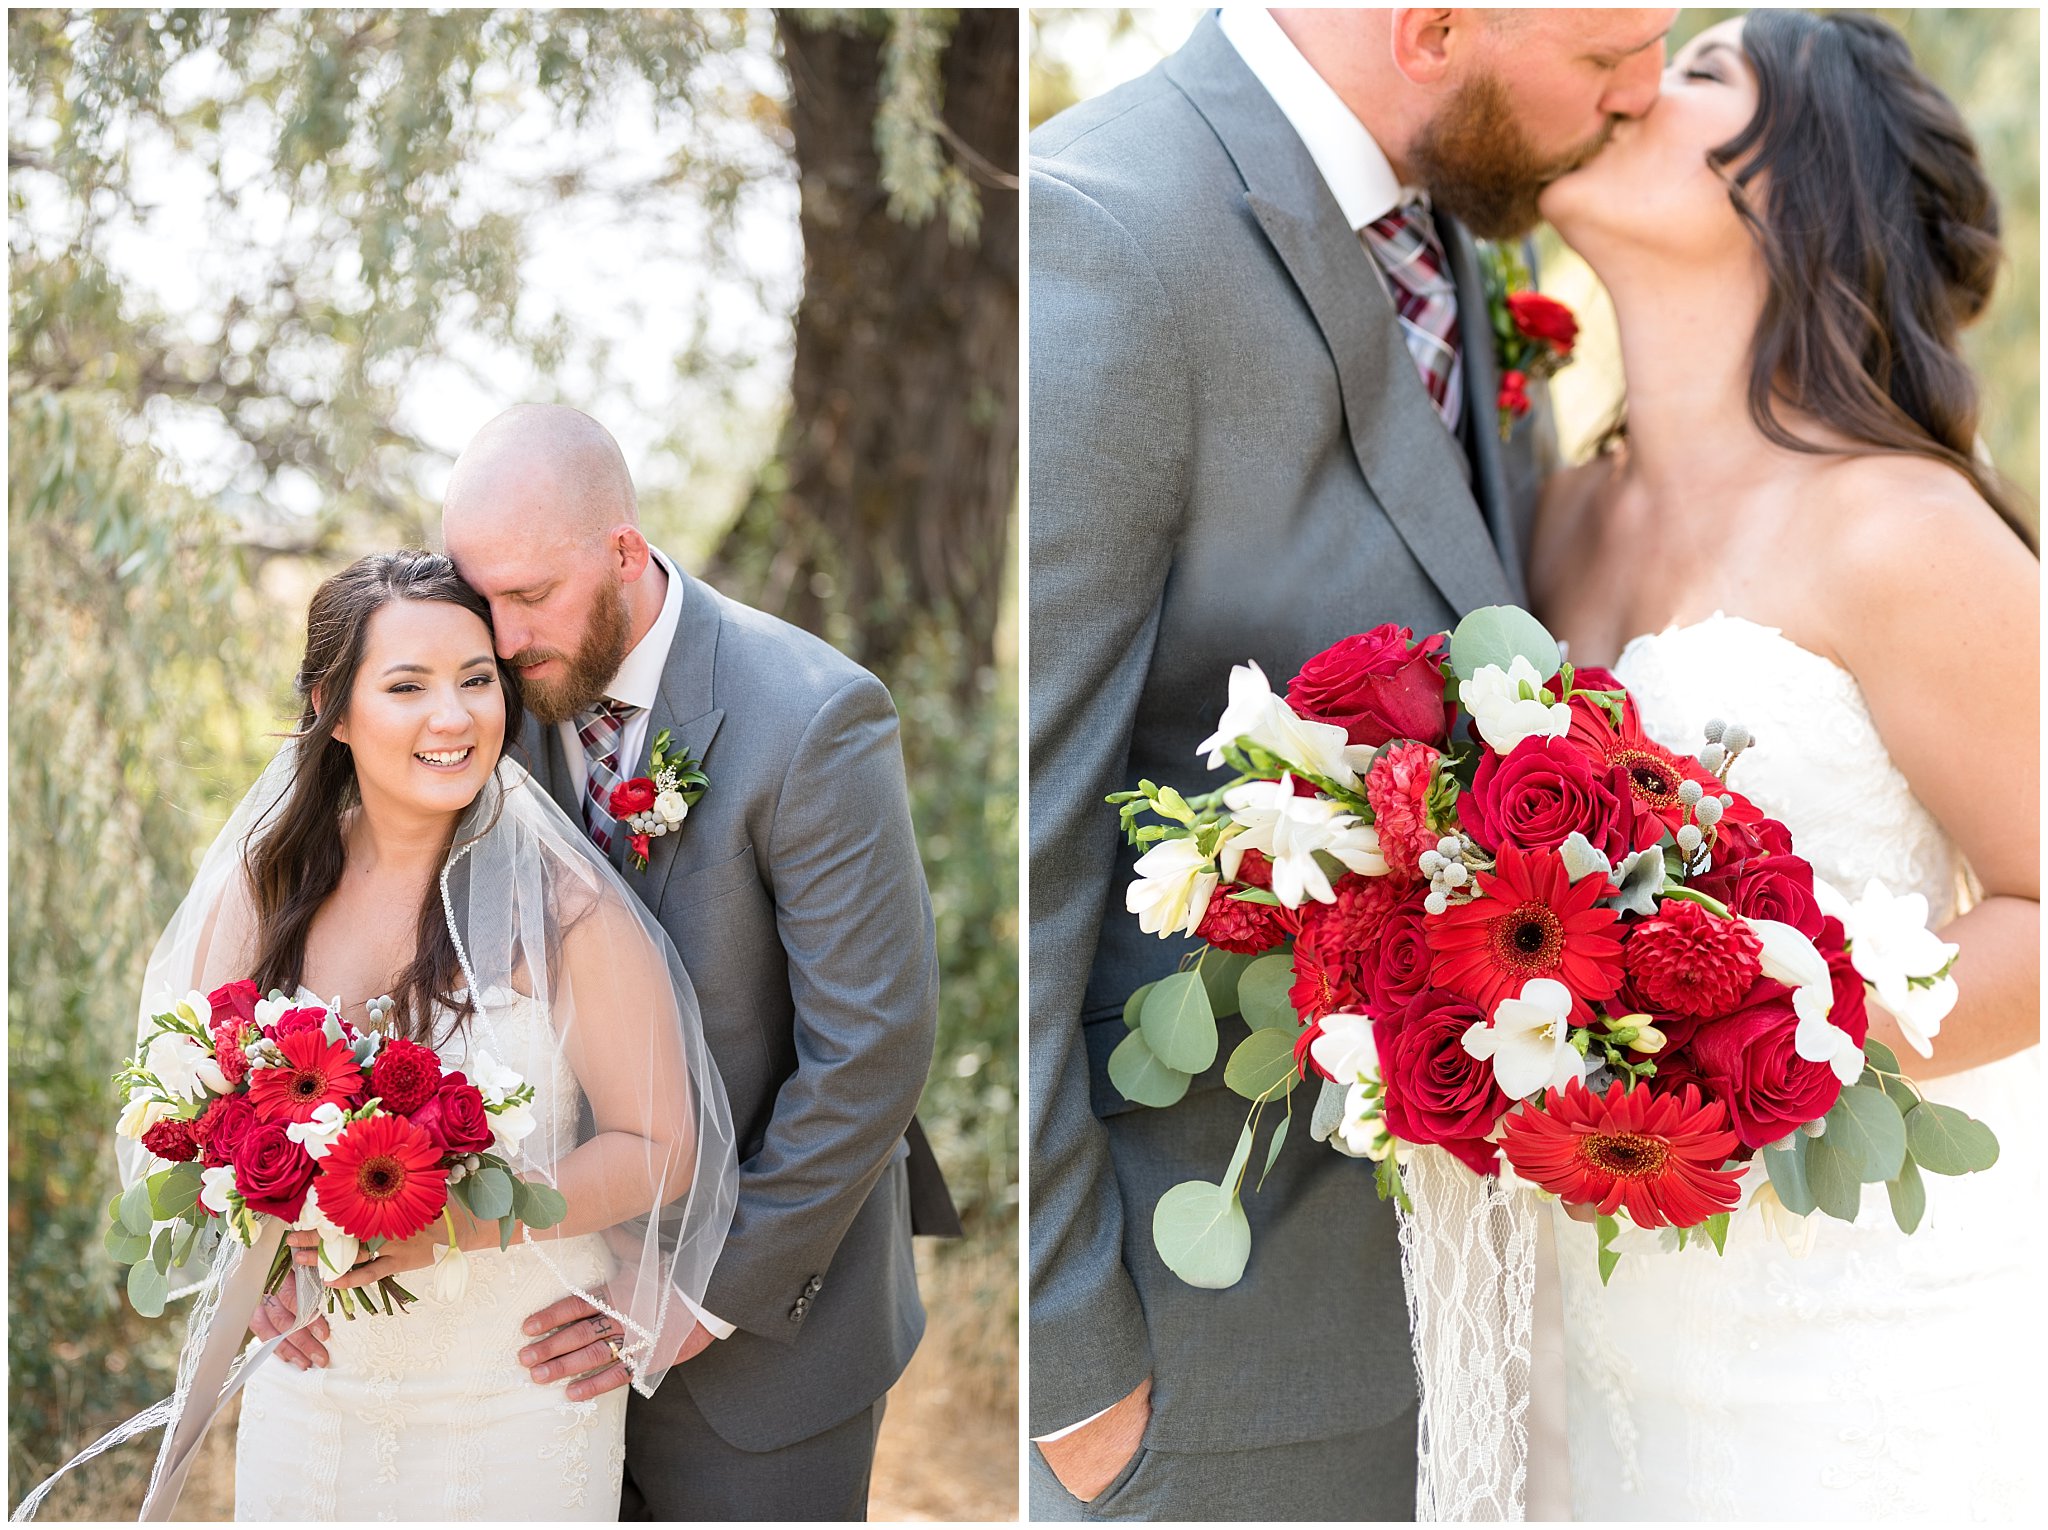 Joyful, elegant bride and groom portrait with detail shots of red and white bouquet | Davis County Outdoor Wedding | Jessie and Dallin Photography